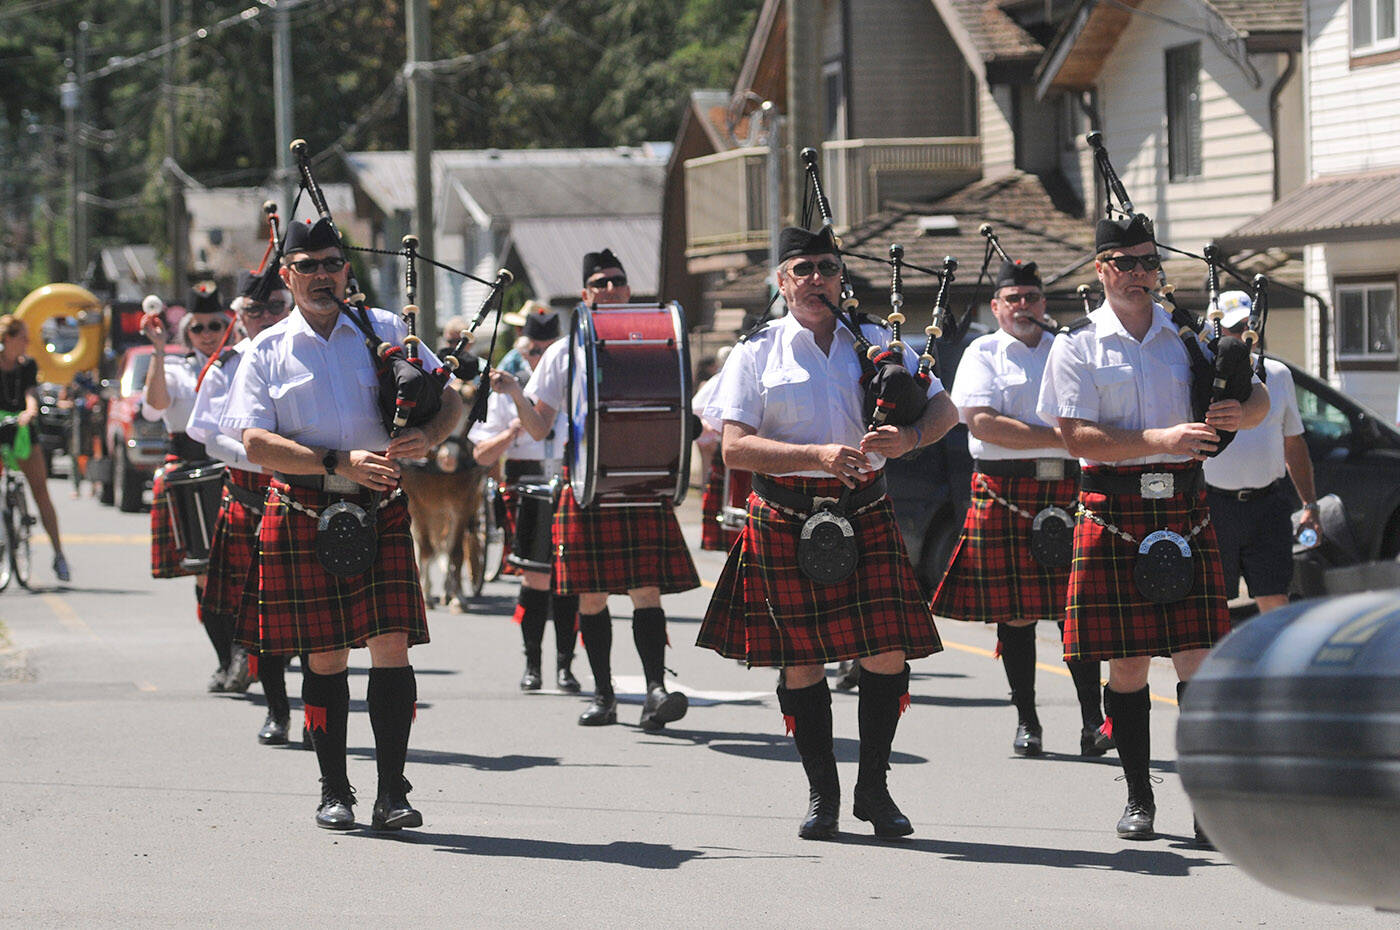 The 2022 Cultus Lake Day parade rolls along 1st Avenue on Saturday, June 25, 2022. Wednesday, July 27, 2022 is Bagpipe Appreciation Day. (Jenna Hauck/ Chilliwack Progress file)